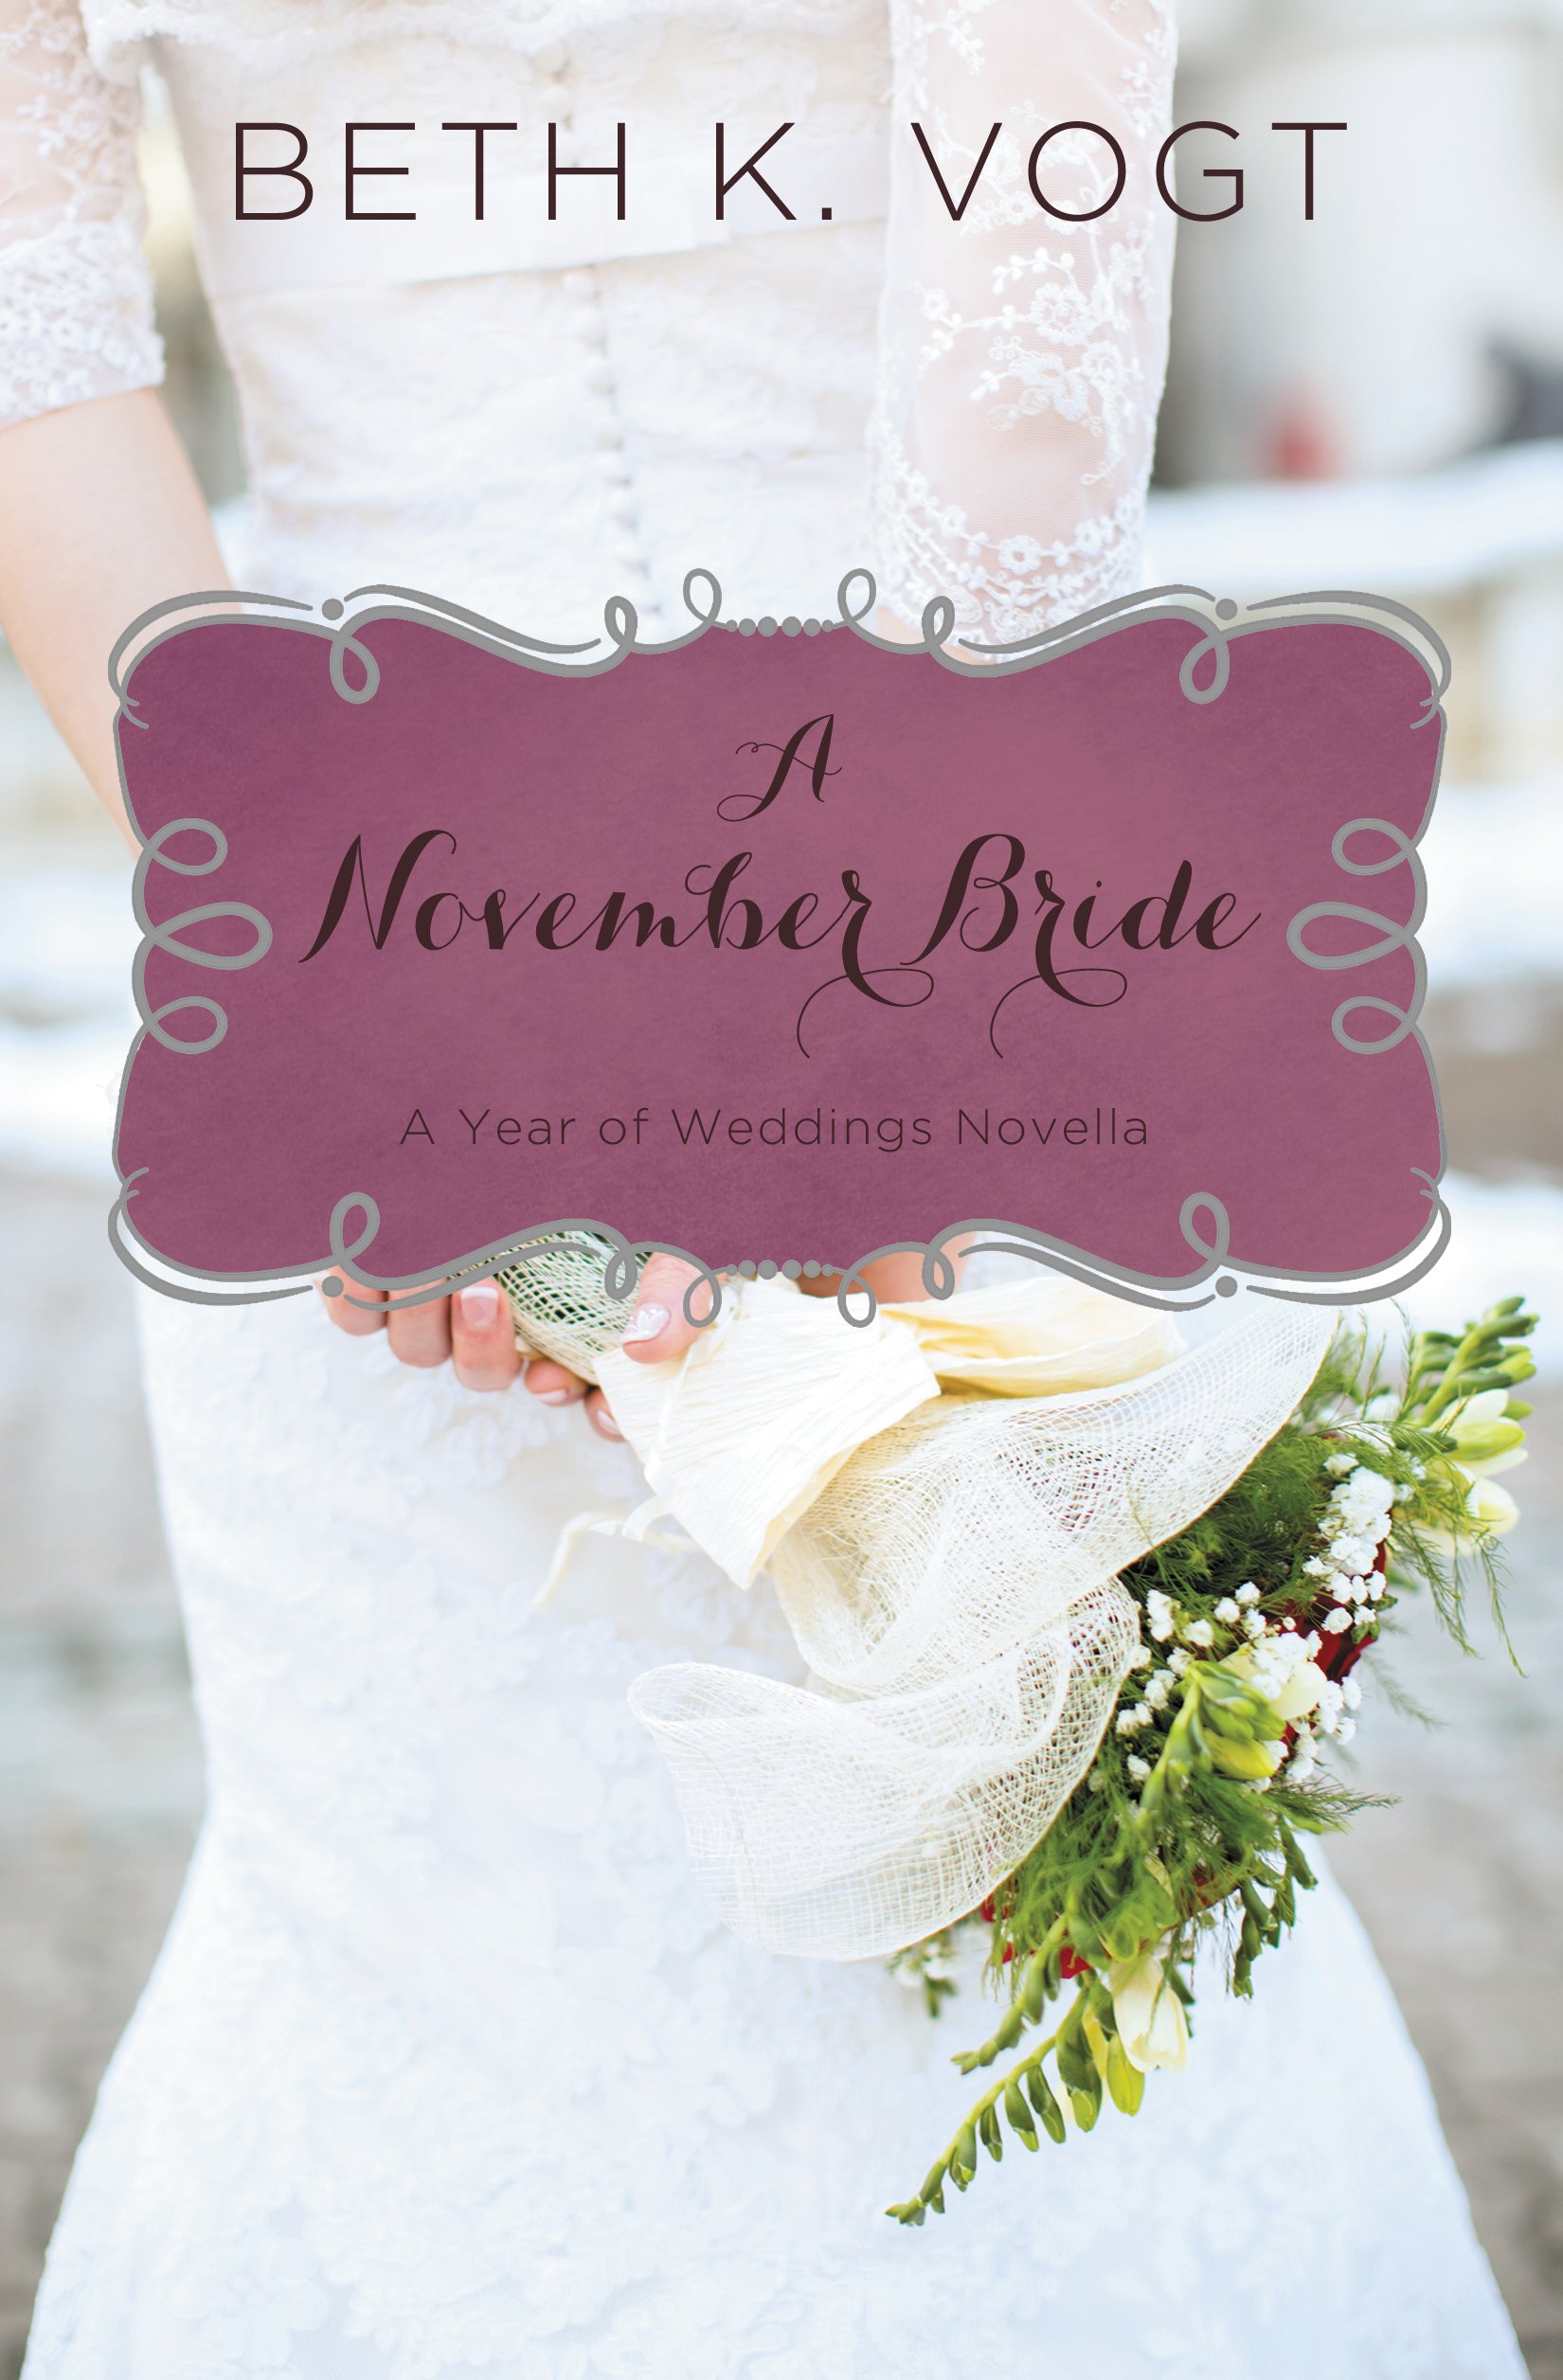 Happy Thanksgiving! | An ebook giveaway of 'A November Bride' by Beth K. Vogt on willbakeforbooks.com! Ends 11/30 at midnight.